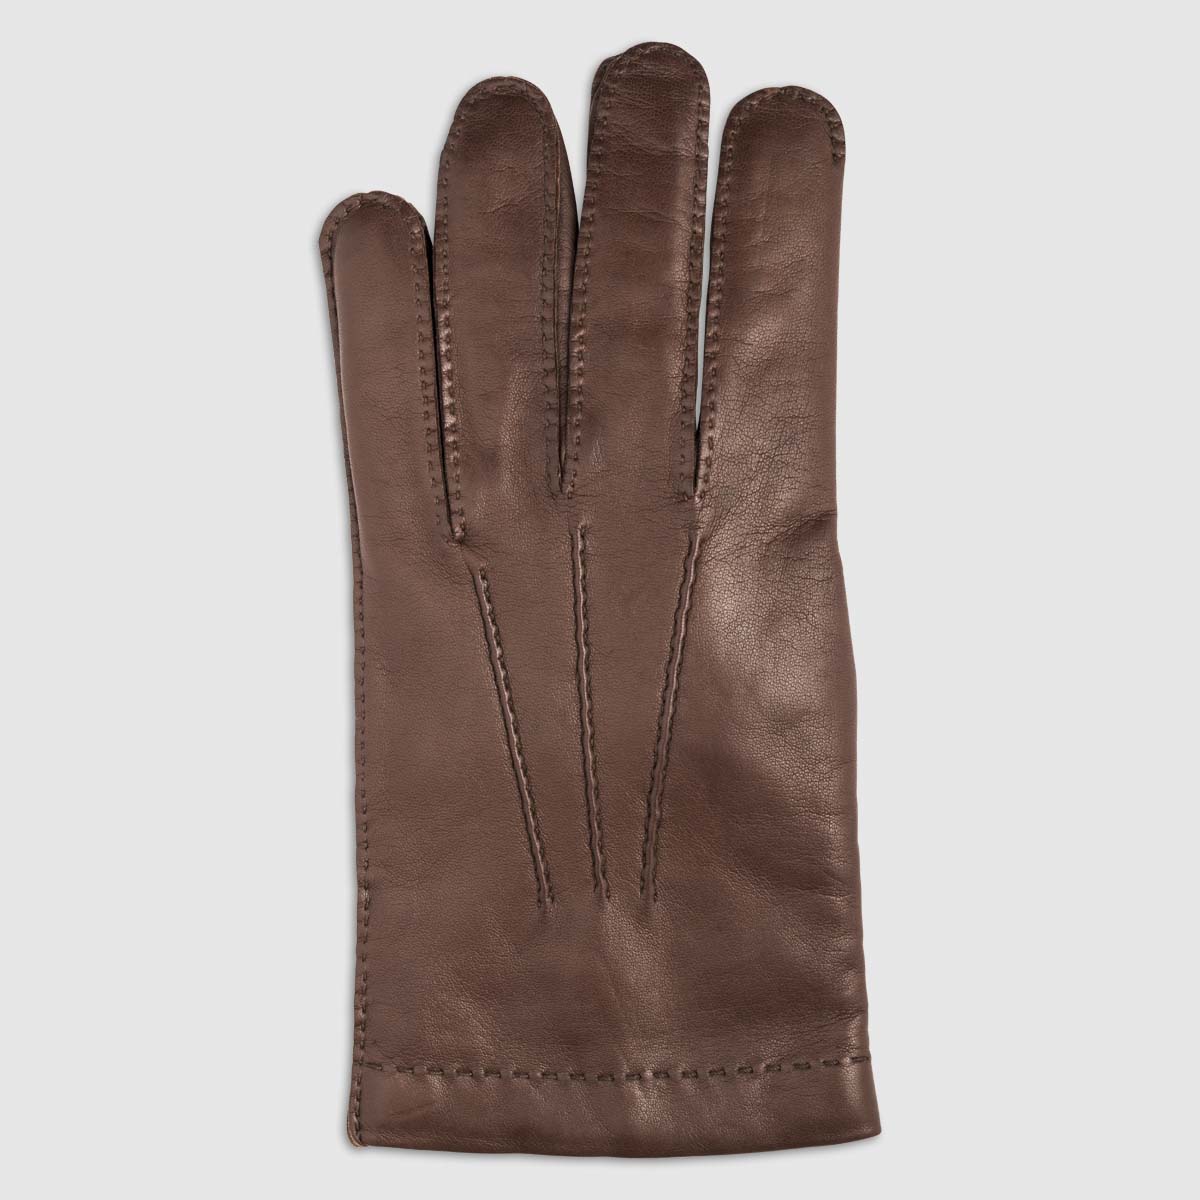 Hand-Stitched Nappa Leather Glove with Cashmere Lining in Conker Alpo Guanti on sale 2022